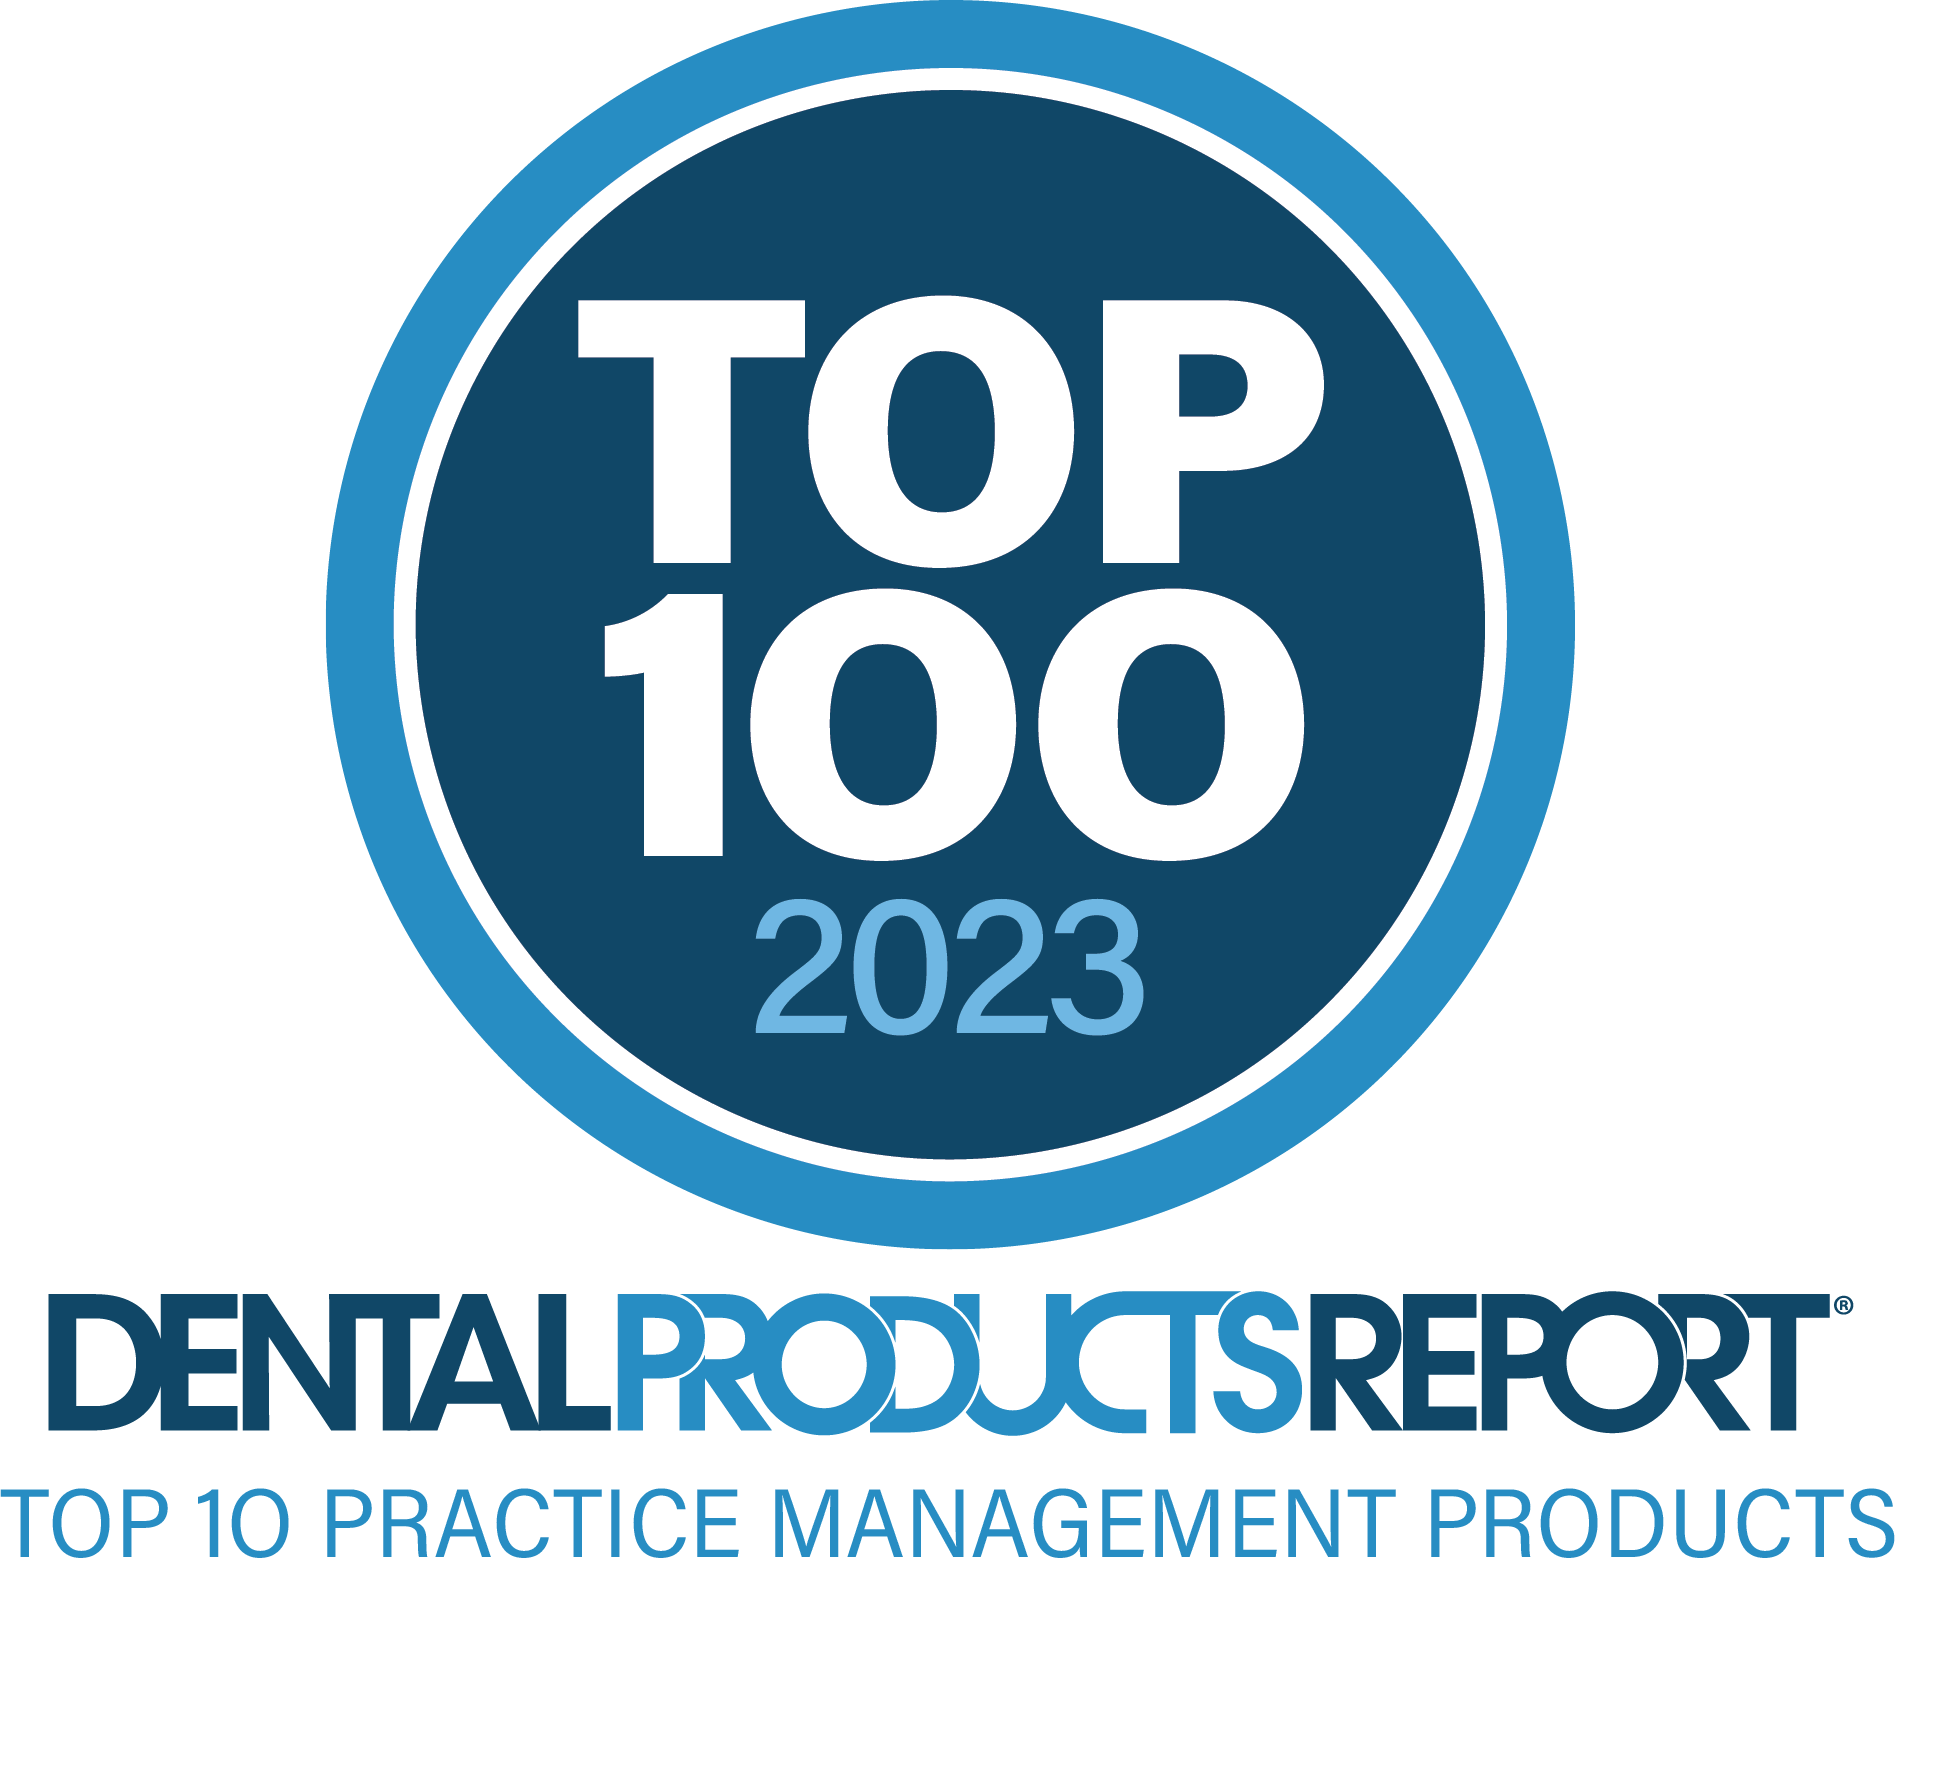 DPR Top 100: Top 10 Practice Management Products of 2023